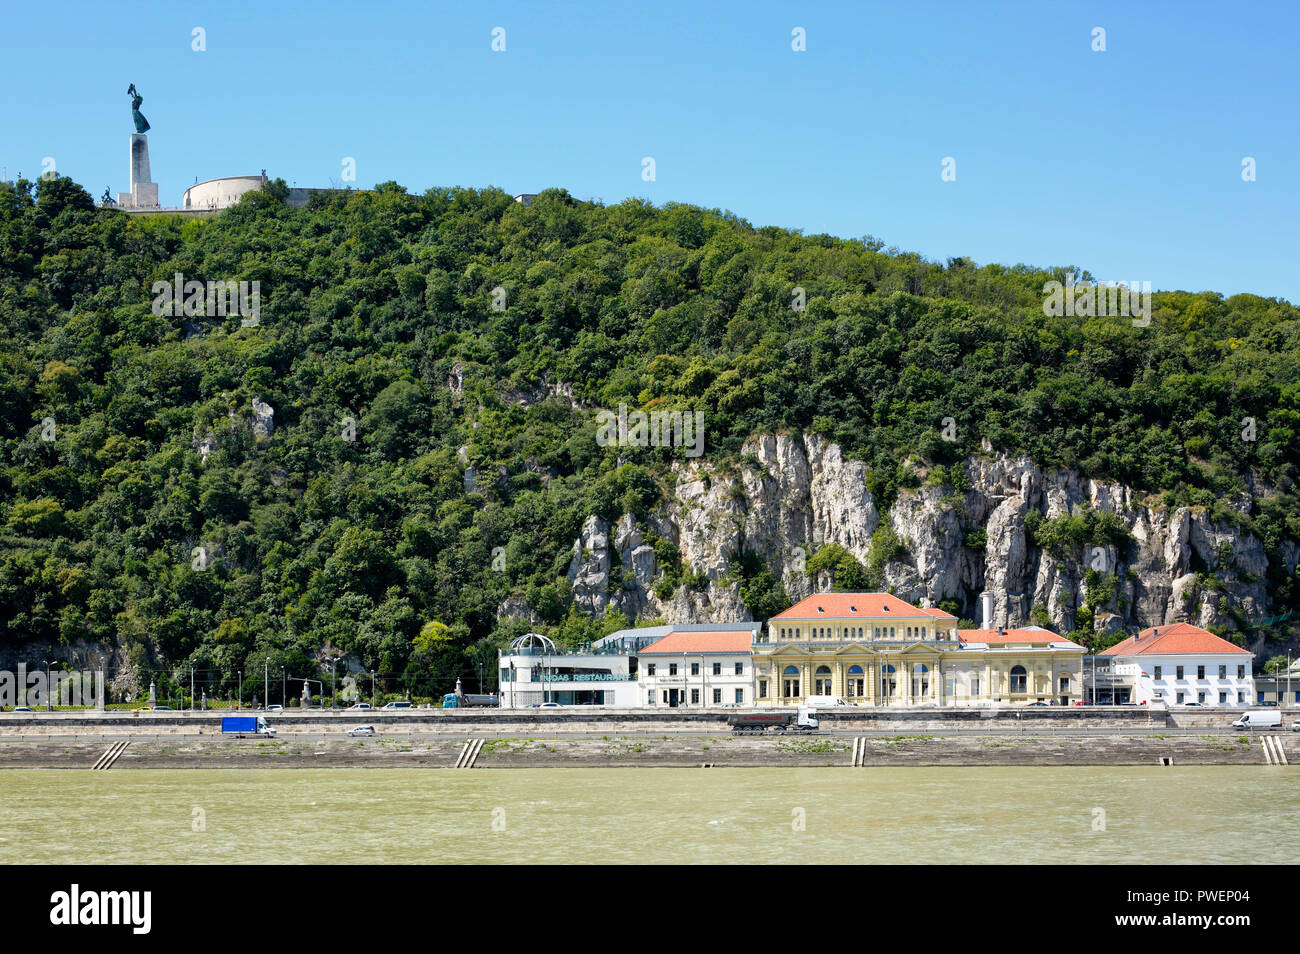 Hungary, Central Hungary, Budapest, Danube, Capital City, Gellert Hill with Liberty Monument in Buda, Liberty Statue by Zsigmond Kisfaludi Strobl, at the foot ot the mountain the Rudas Bath, Thermal bath and swimming baths, tourism, UNESCO World Heritage Site Stock Photo